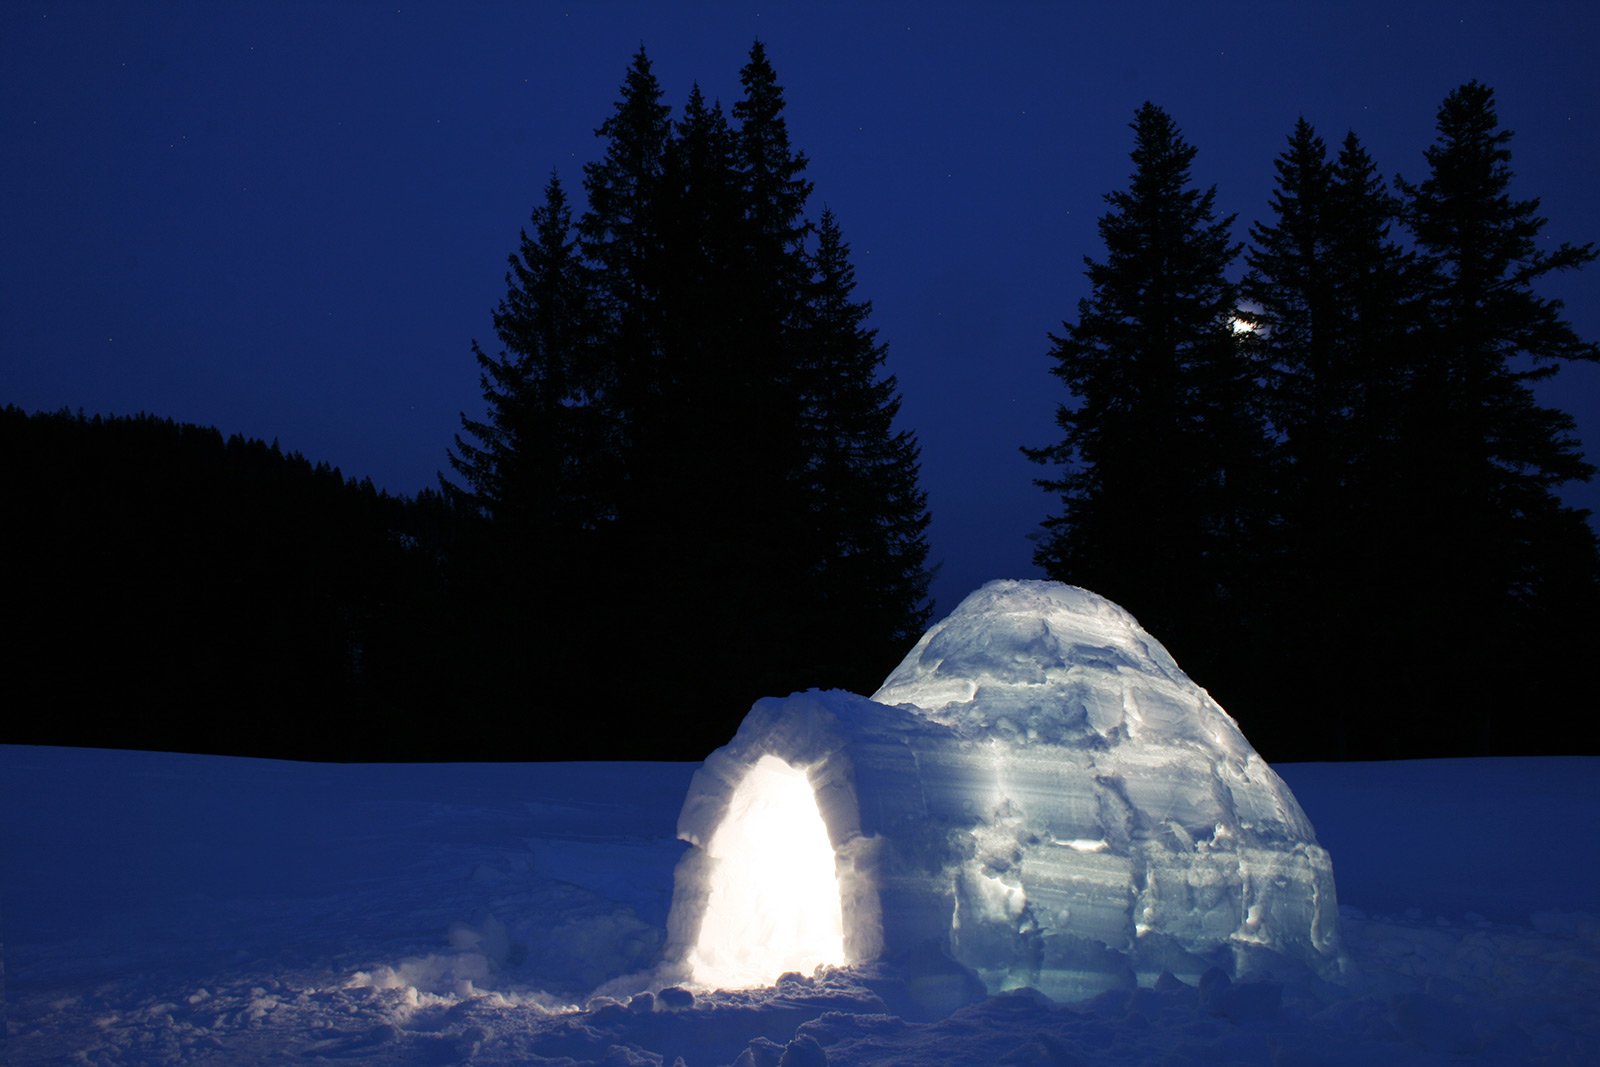 How to build an igloo in Salzburg